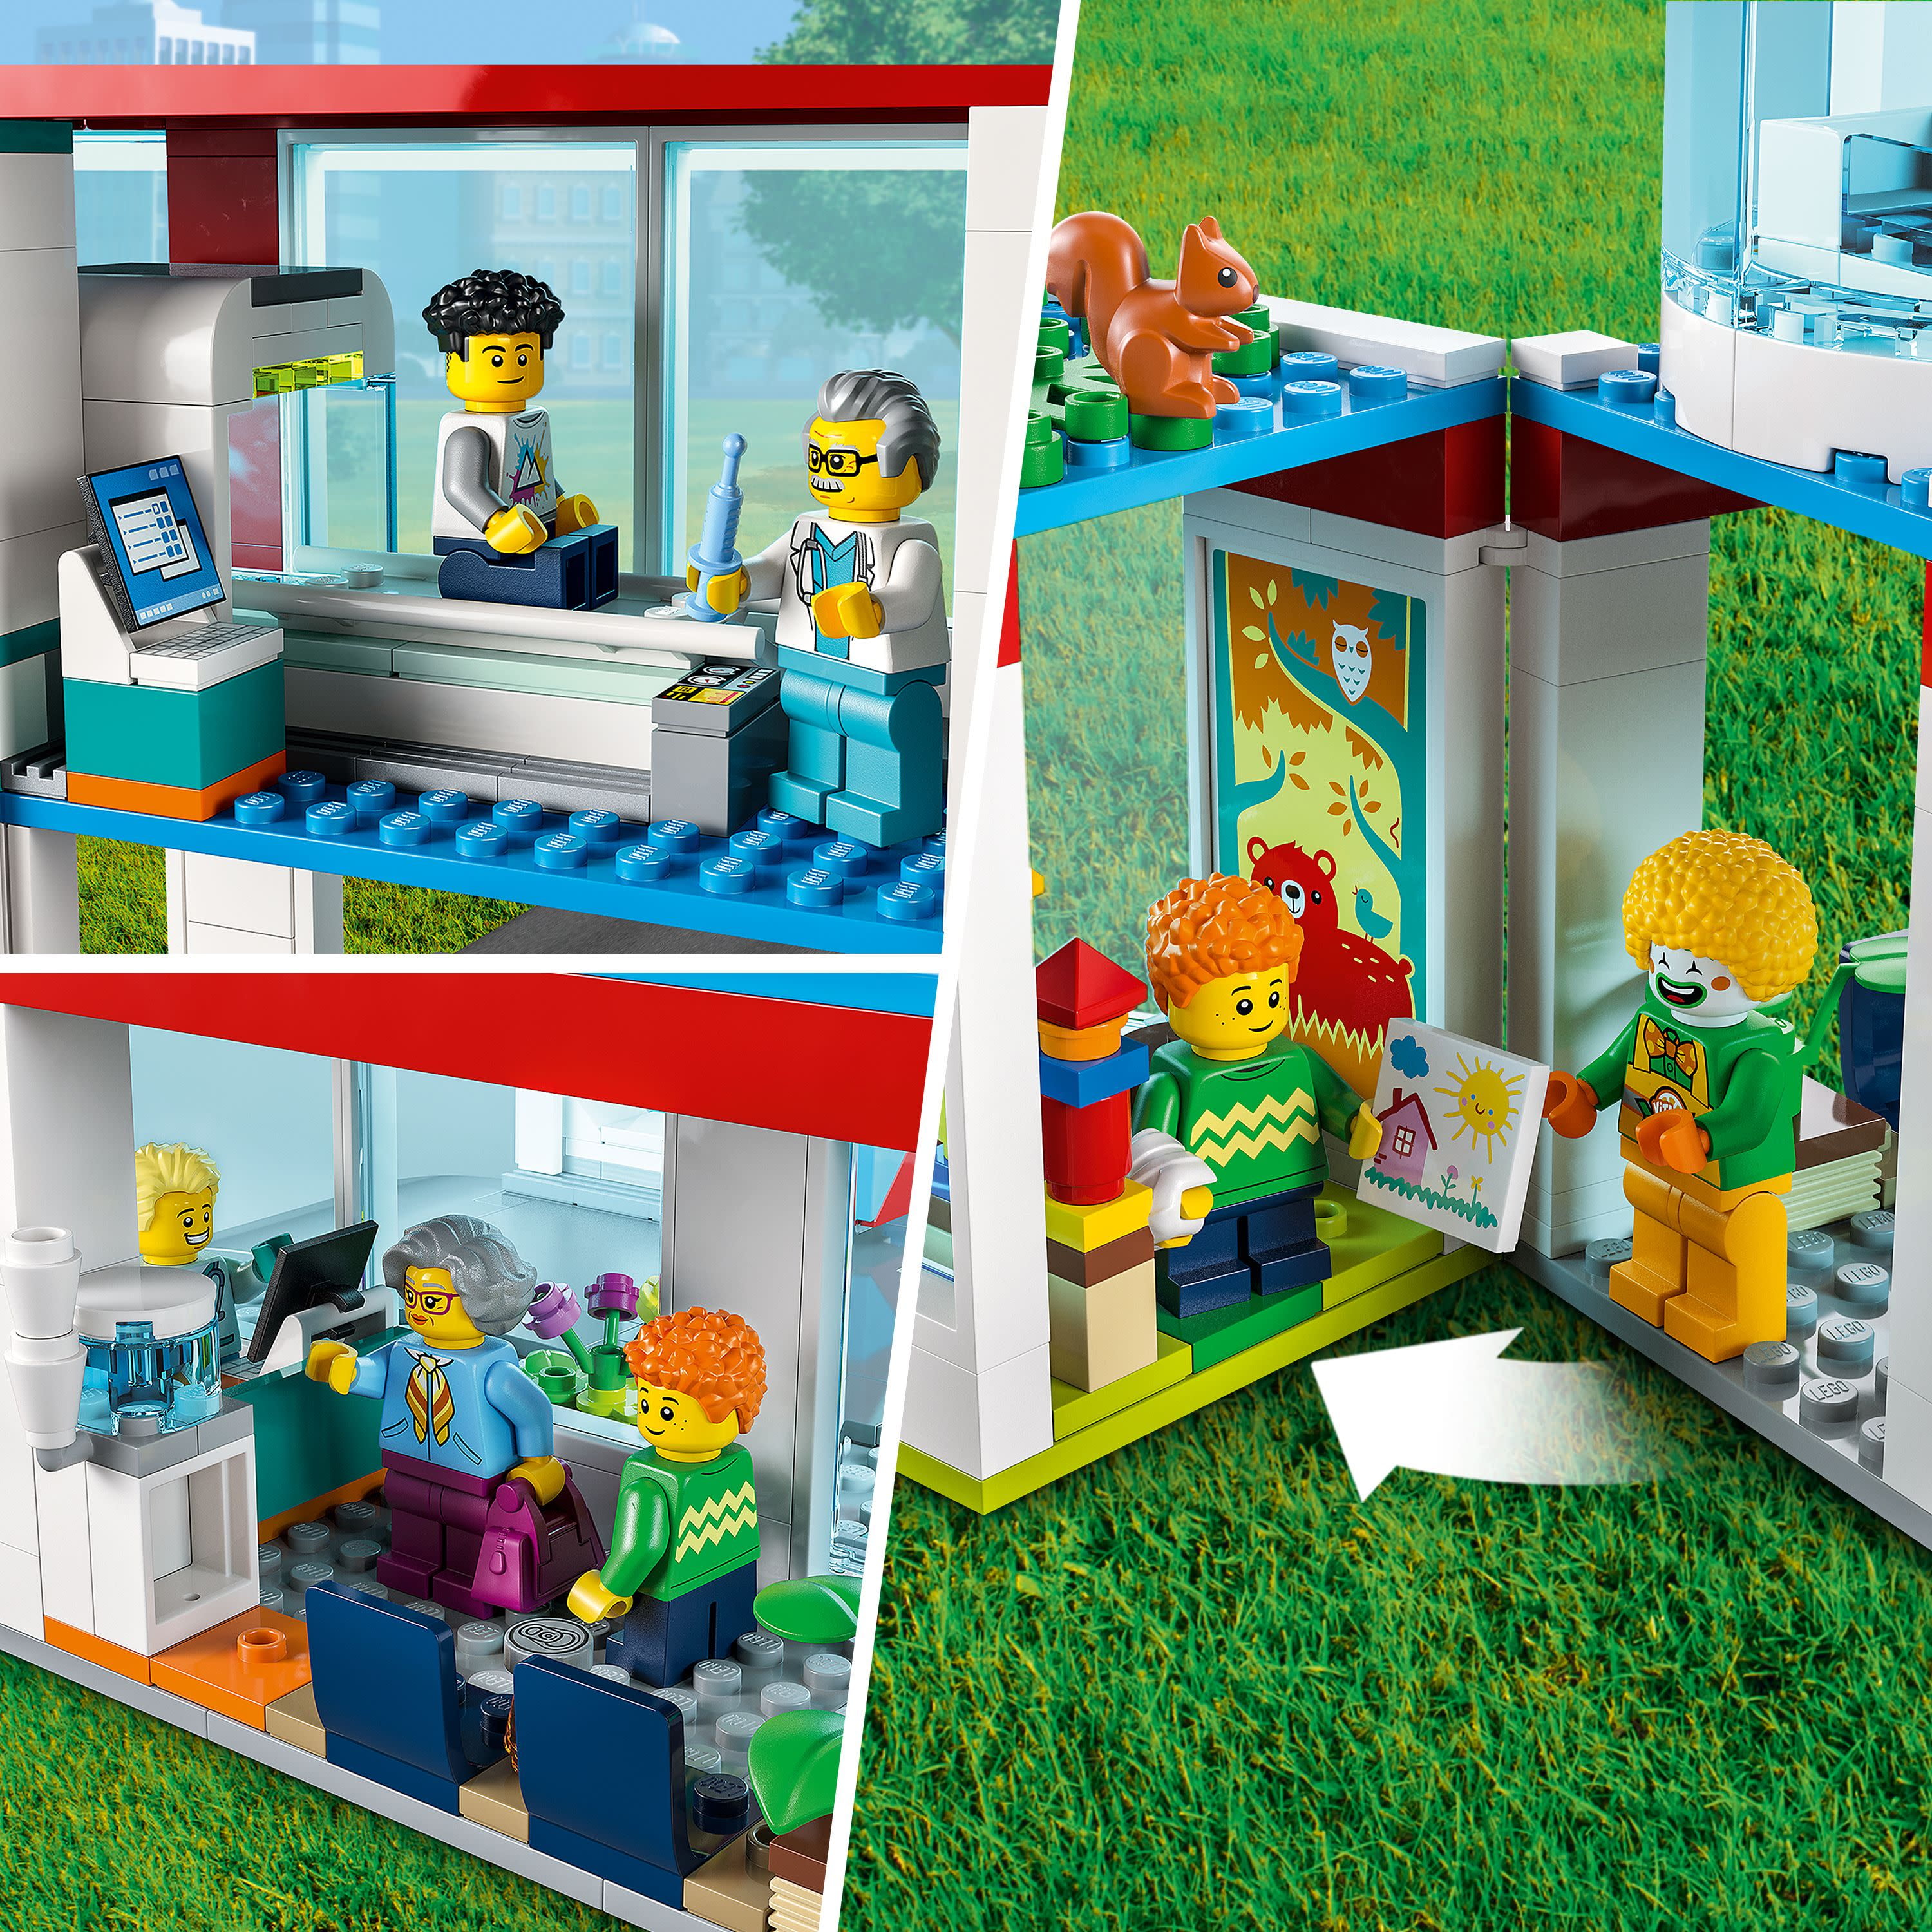 LEGO City Hospital Building with Toy Helicopter and 12 Mini Figures, Pretend Play Toy Hospital for Educational Fun, Connect to Other LEGO City Sets, for Kids Age 7+ - Walmart.com